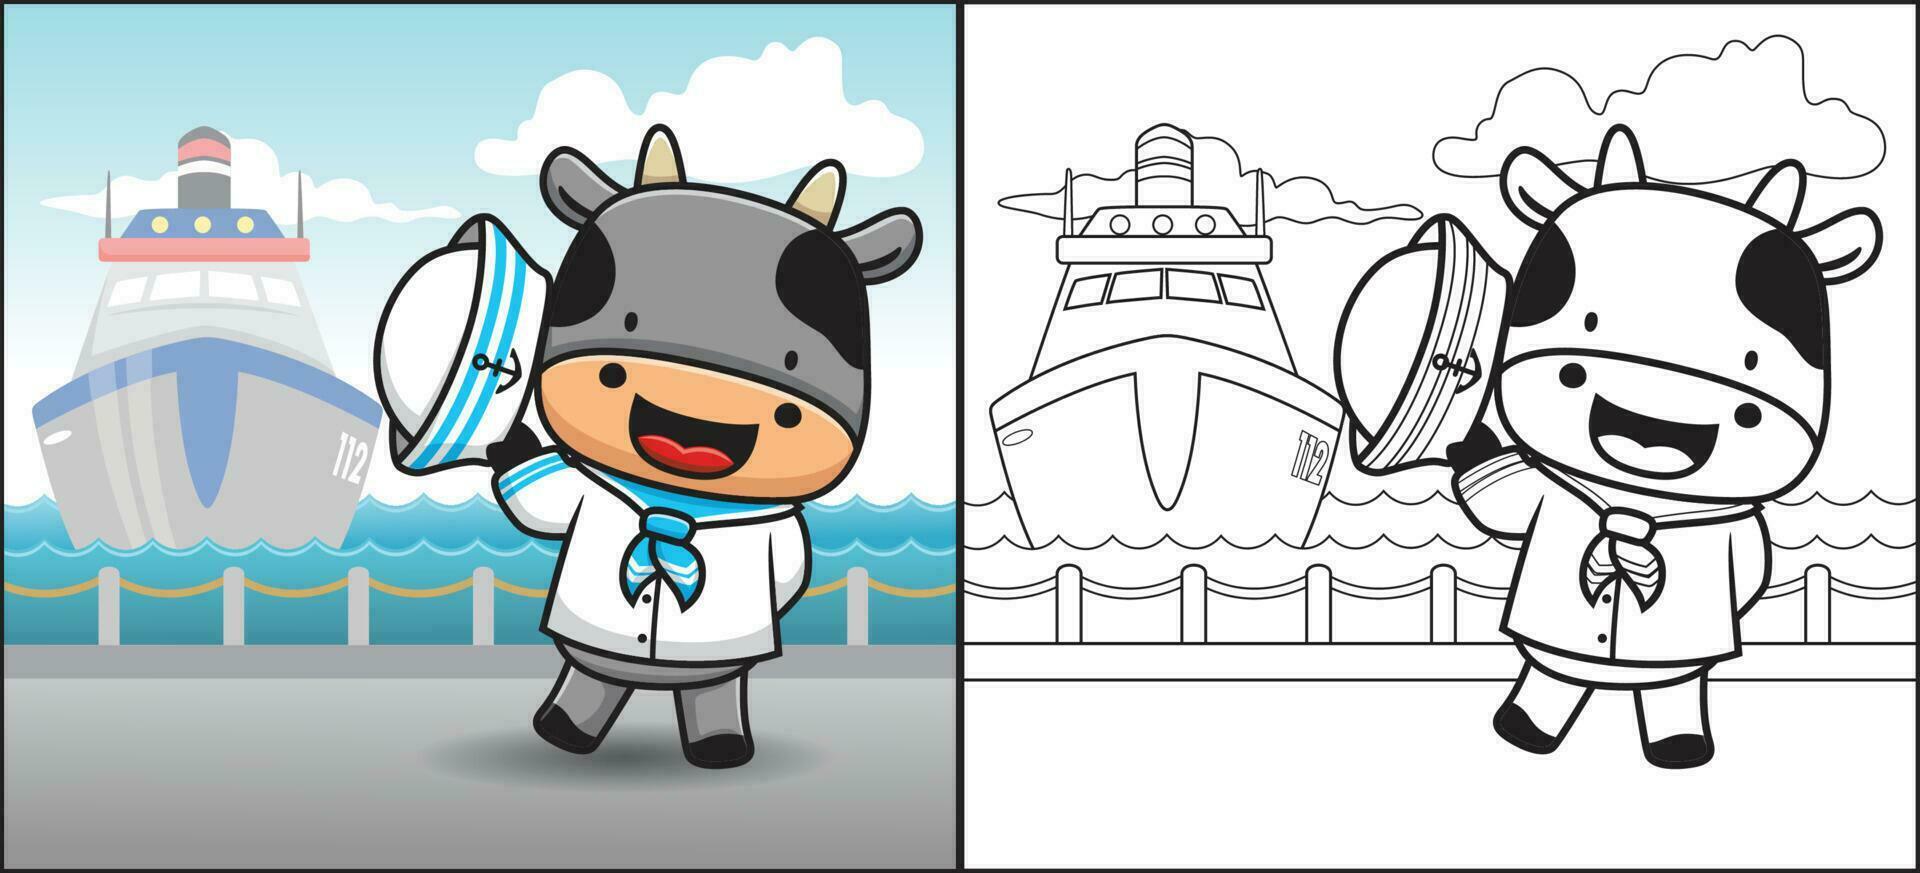 Coloring book or page, funny cow in sailor uniform, ship in the port on blue sky background vector